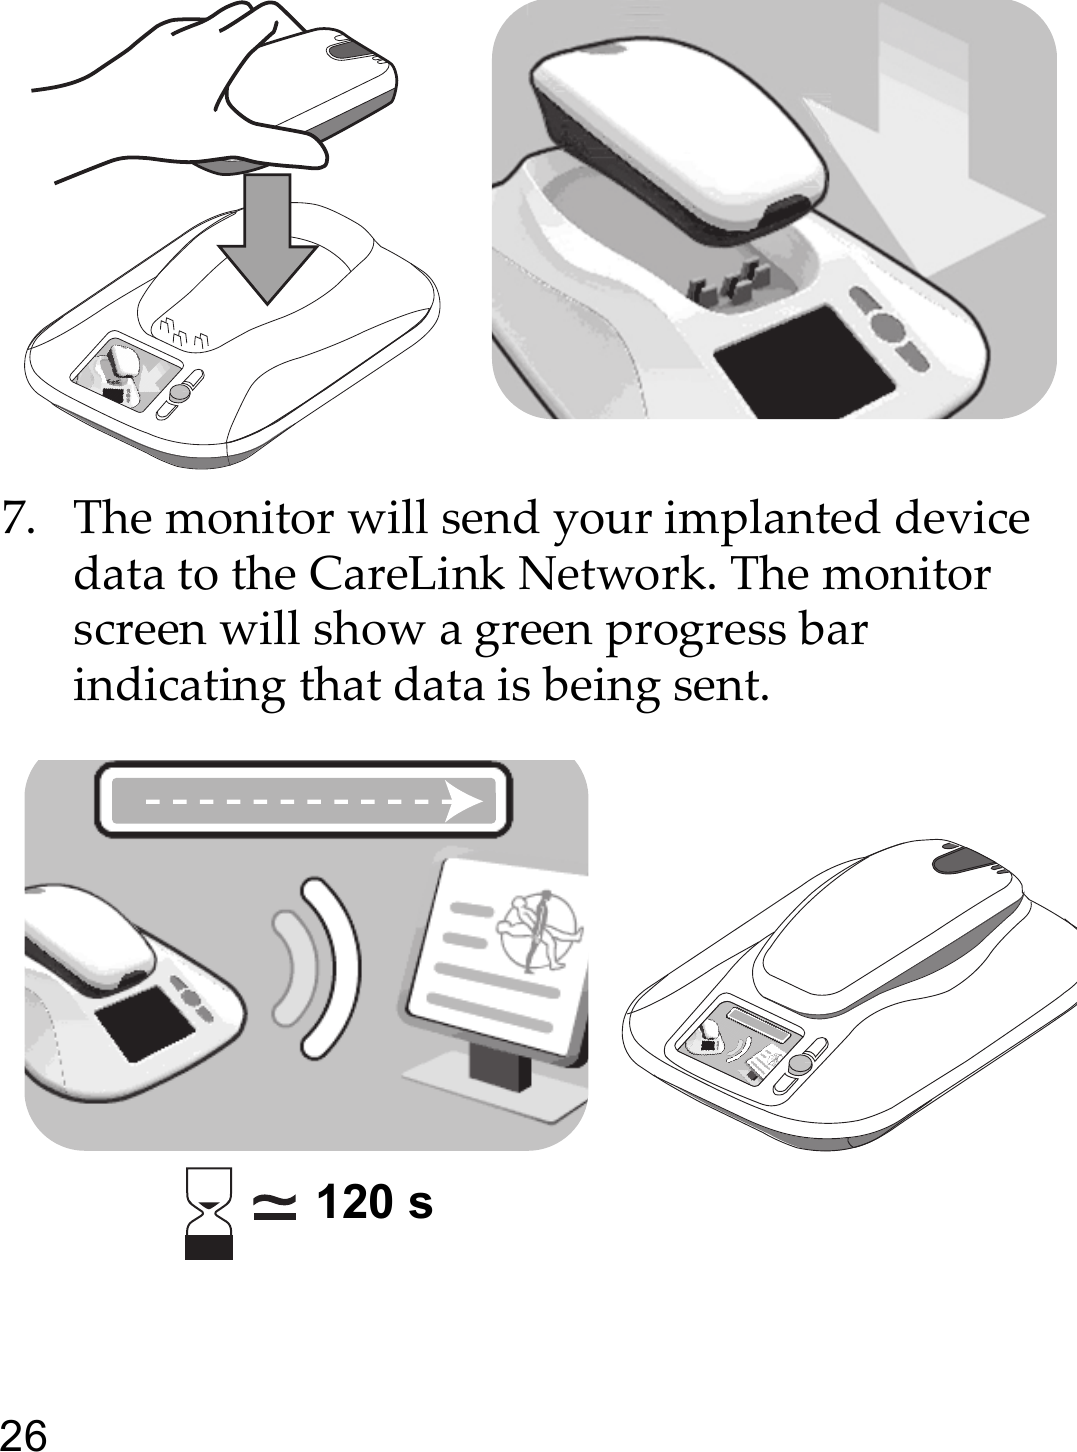 267. The monitor will send your implanted device data to the CareLink Network. The monitor screen will show a green progress bar indicating that data is being sent.120 s